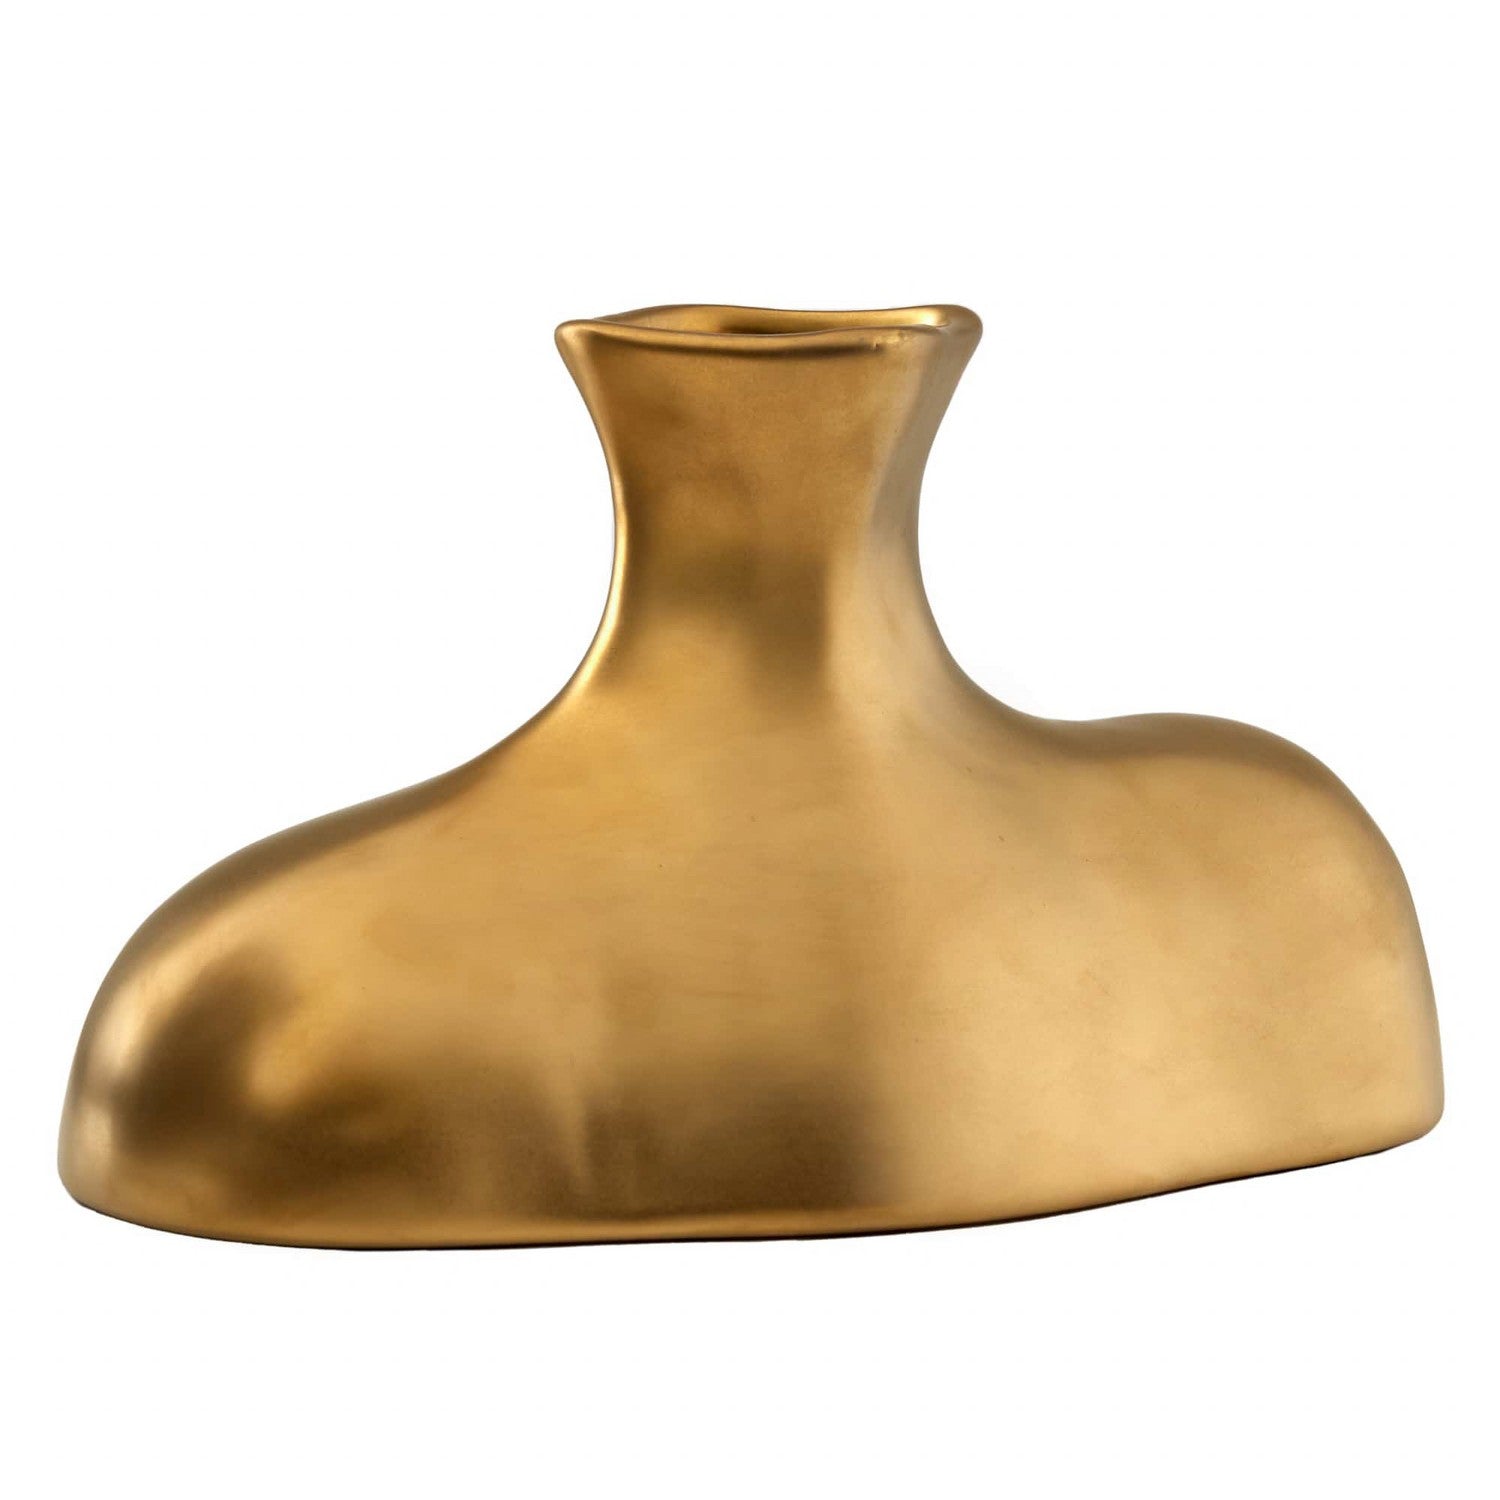 Vase from the Tilbury collection in Gold finish